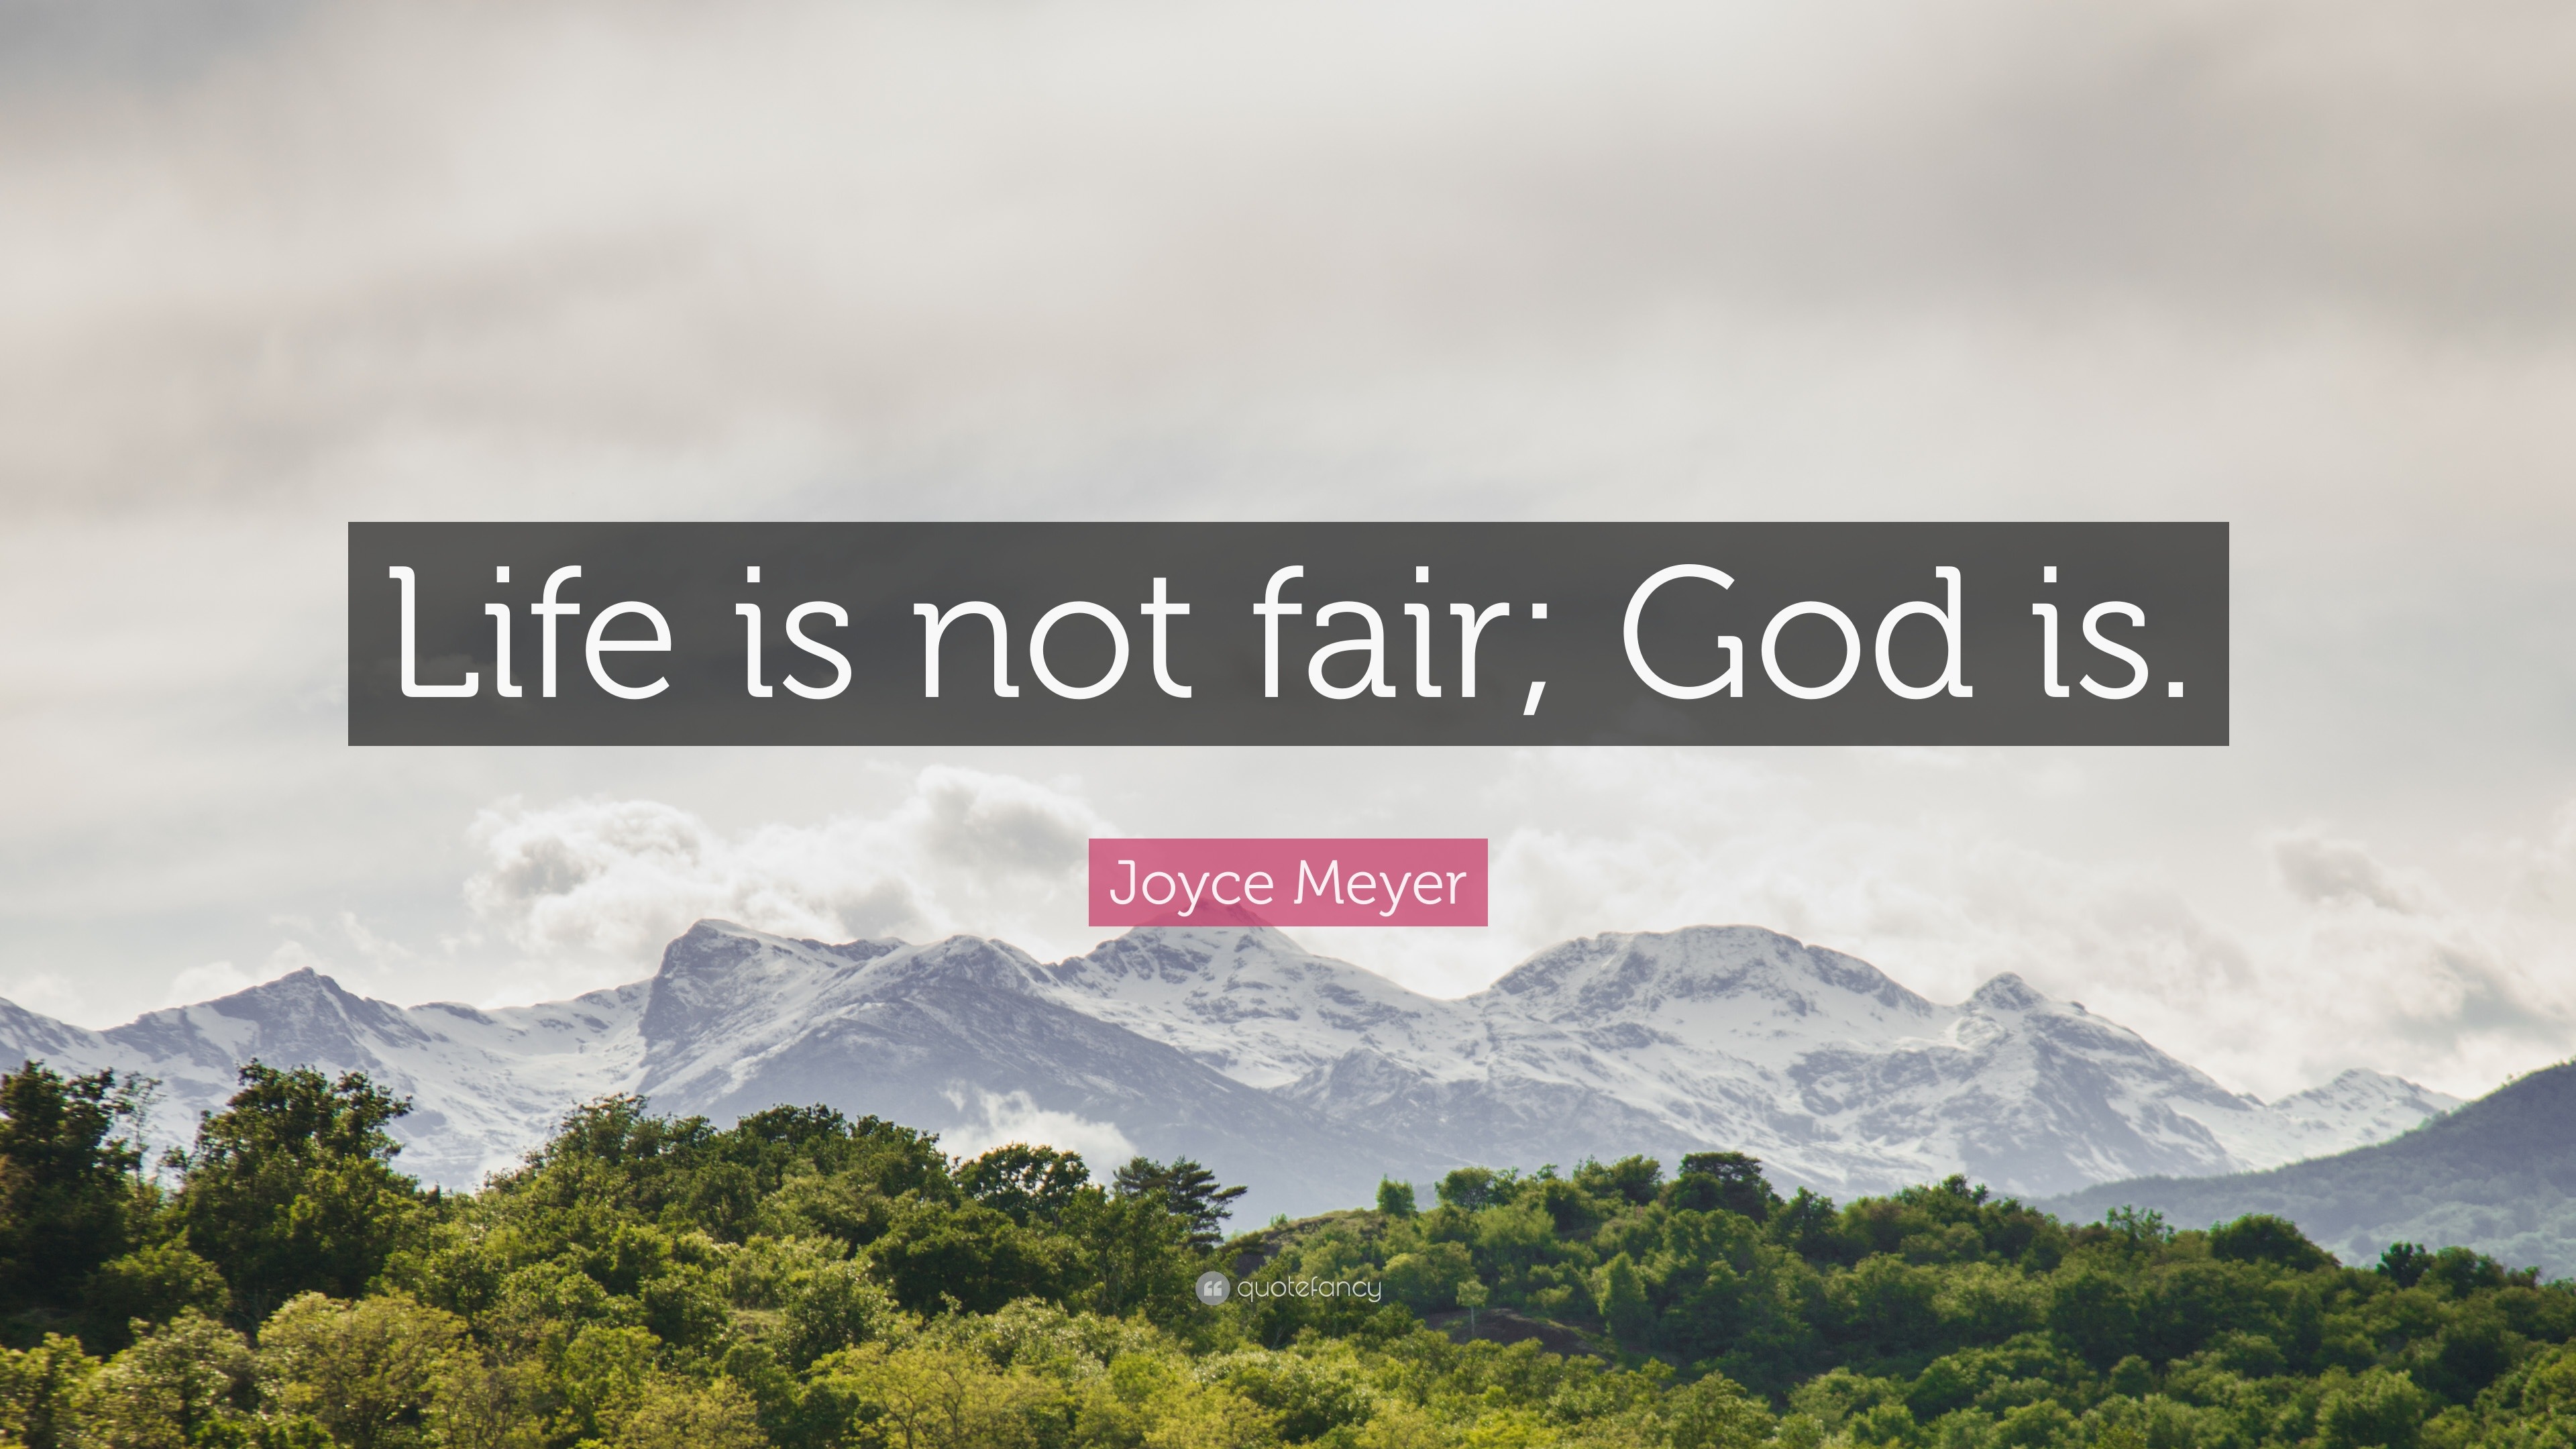 Joyce Meyer Quote “Life is not fair God is ”